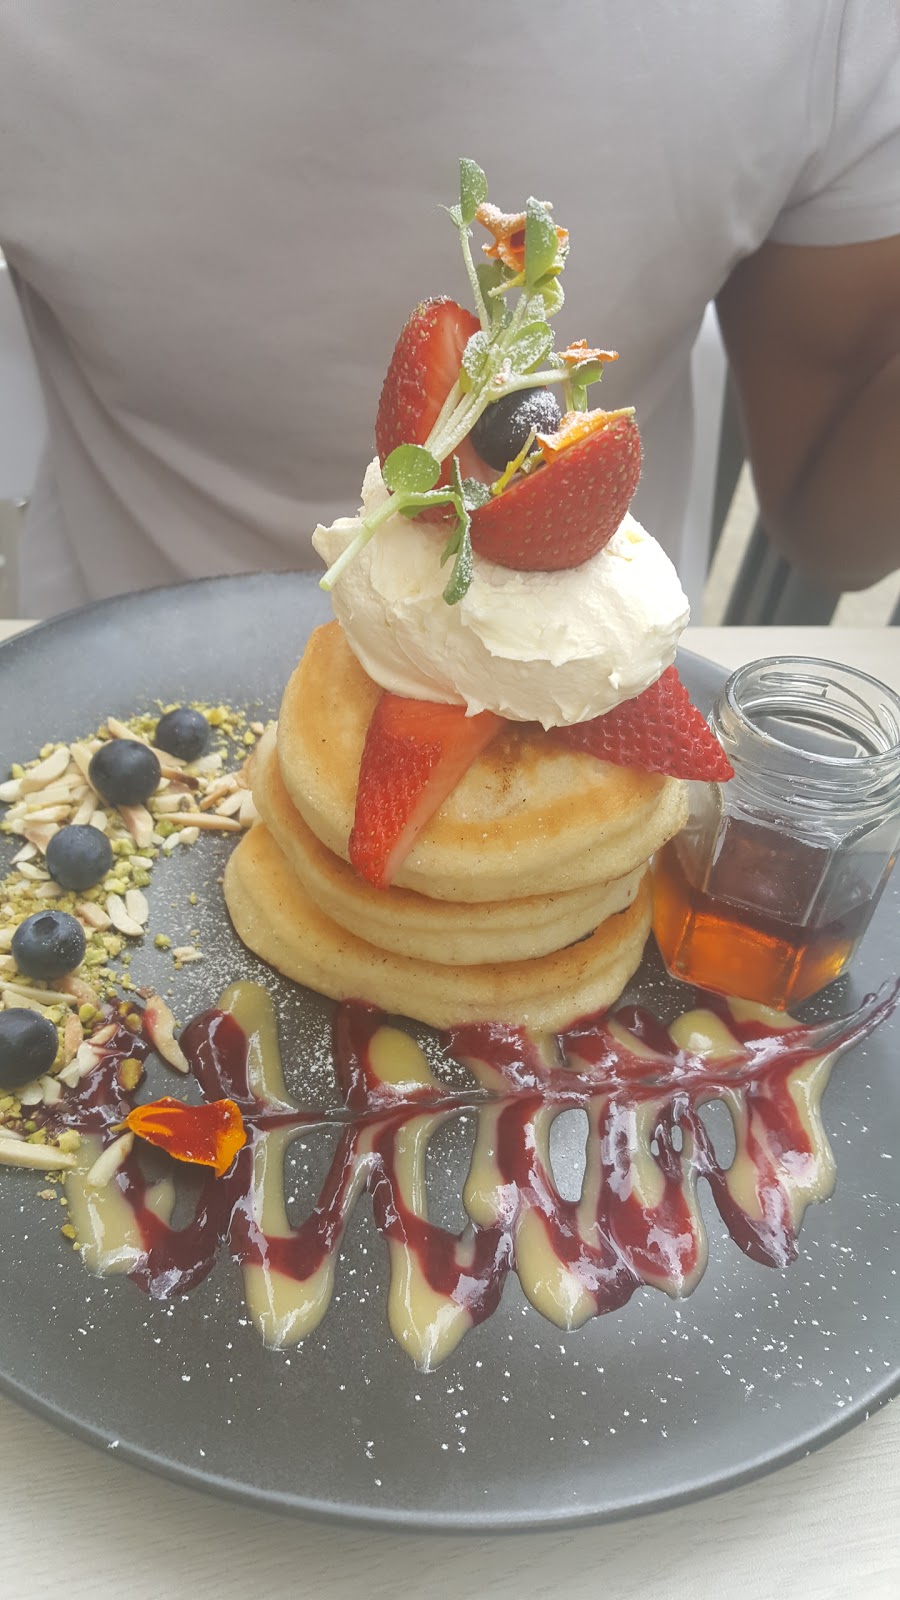 The Grounds Keeper Cafe Parramatta | cafe | Corner of George street and, OConnell St, Parramatta NSW 2150, Australia | 0298084696 OR +61 2 9808 4696